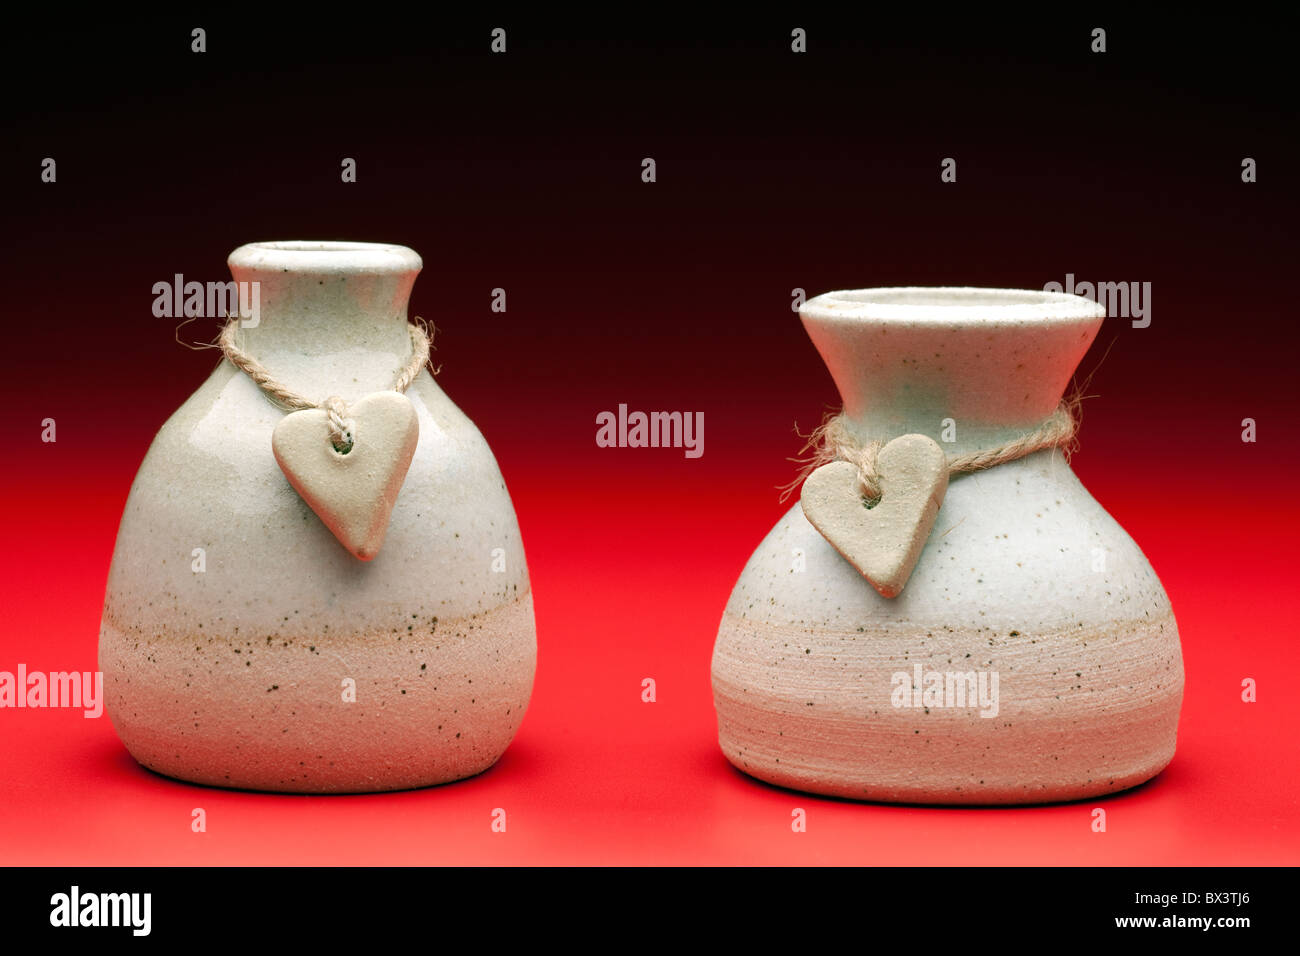 Two stone hearts on string wrapped around two ceramic pots Stock Photo